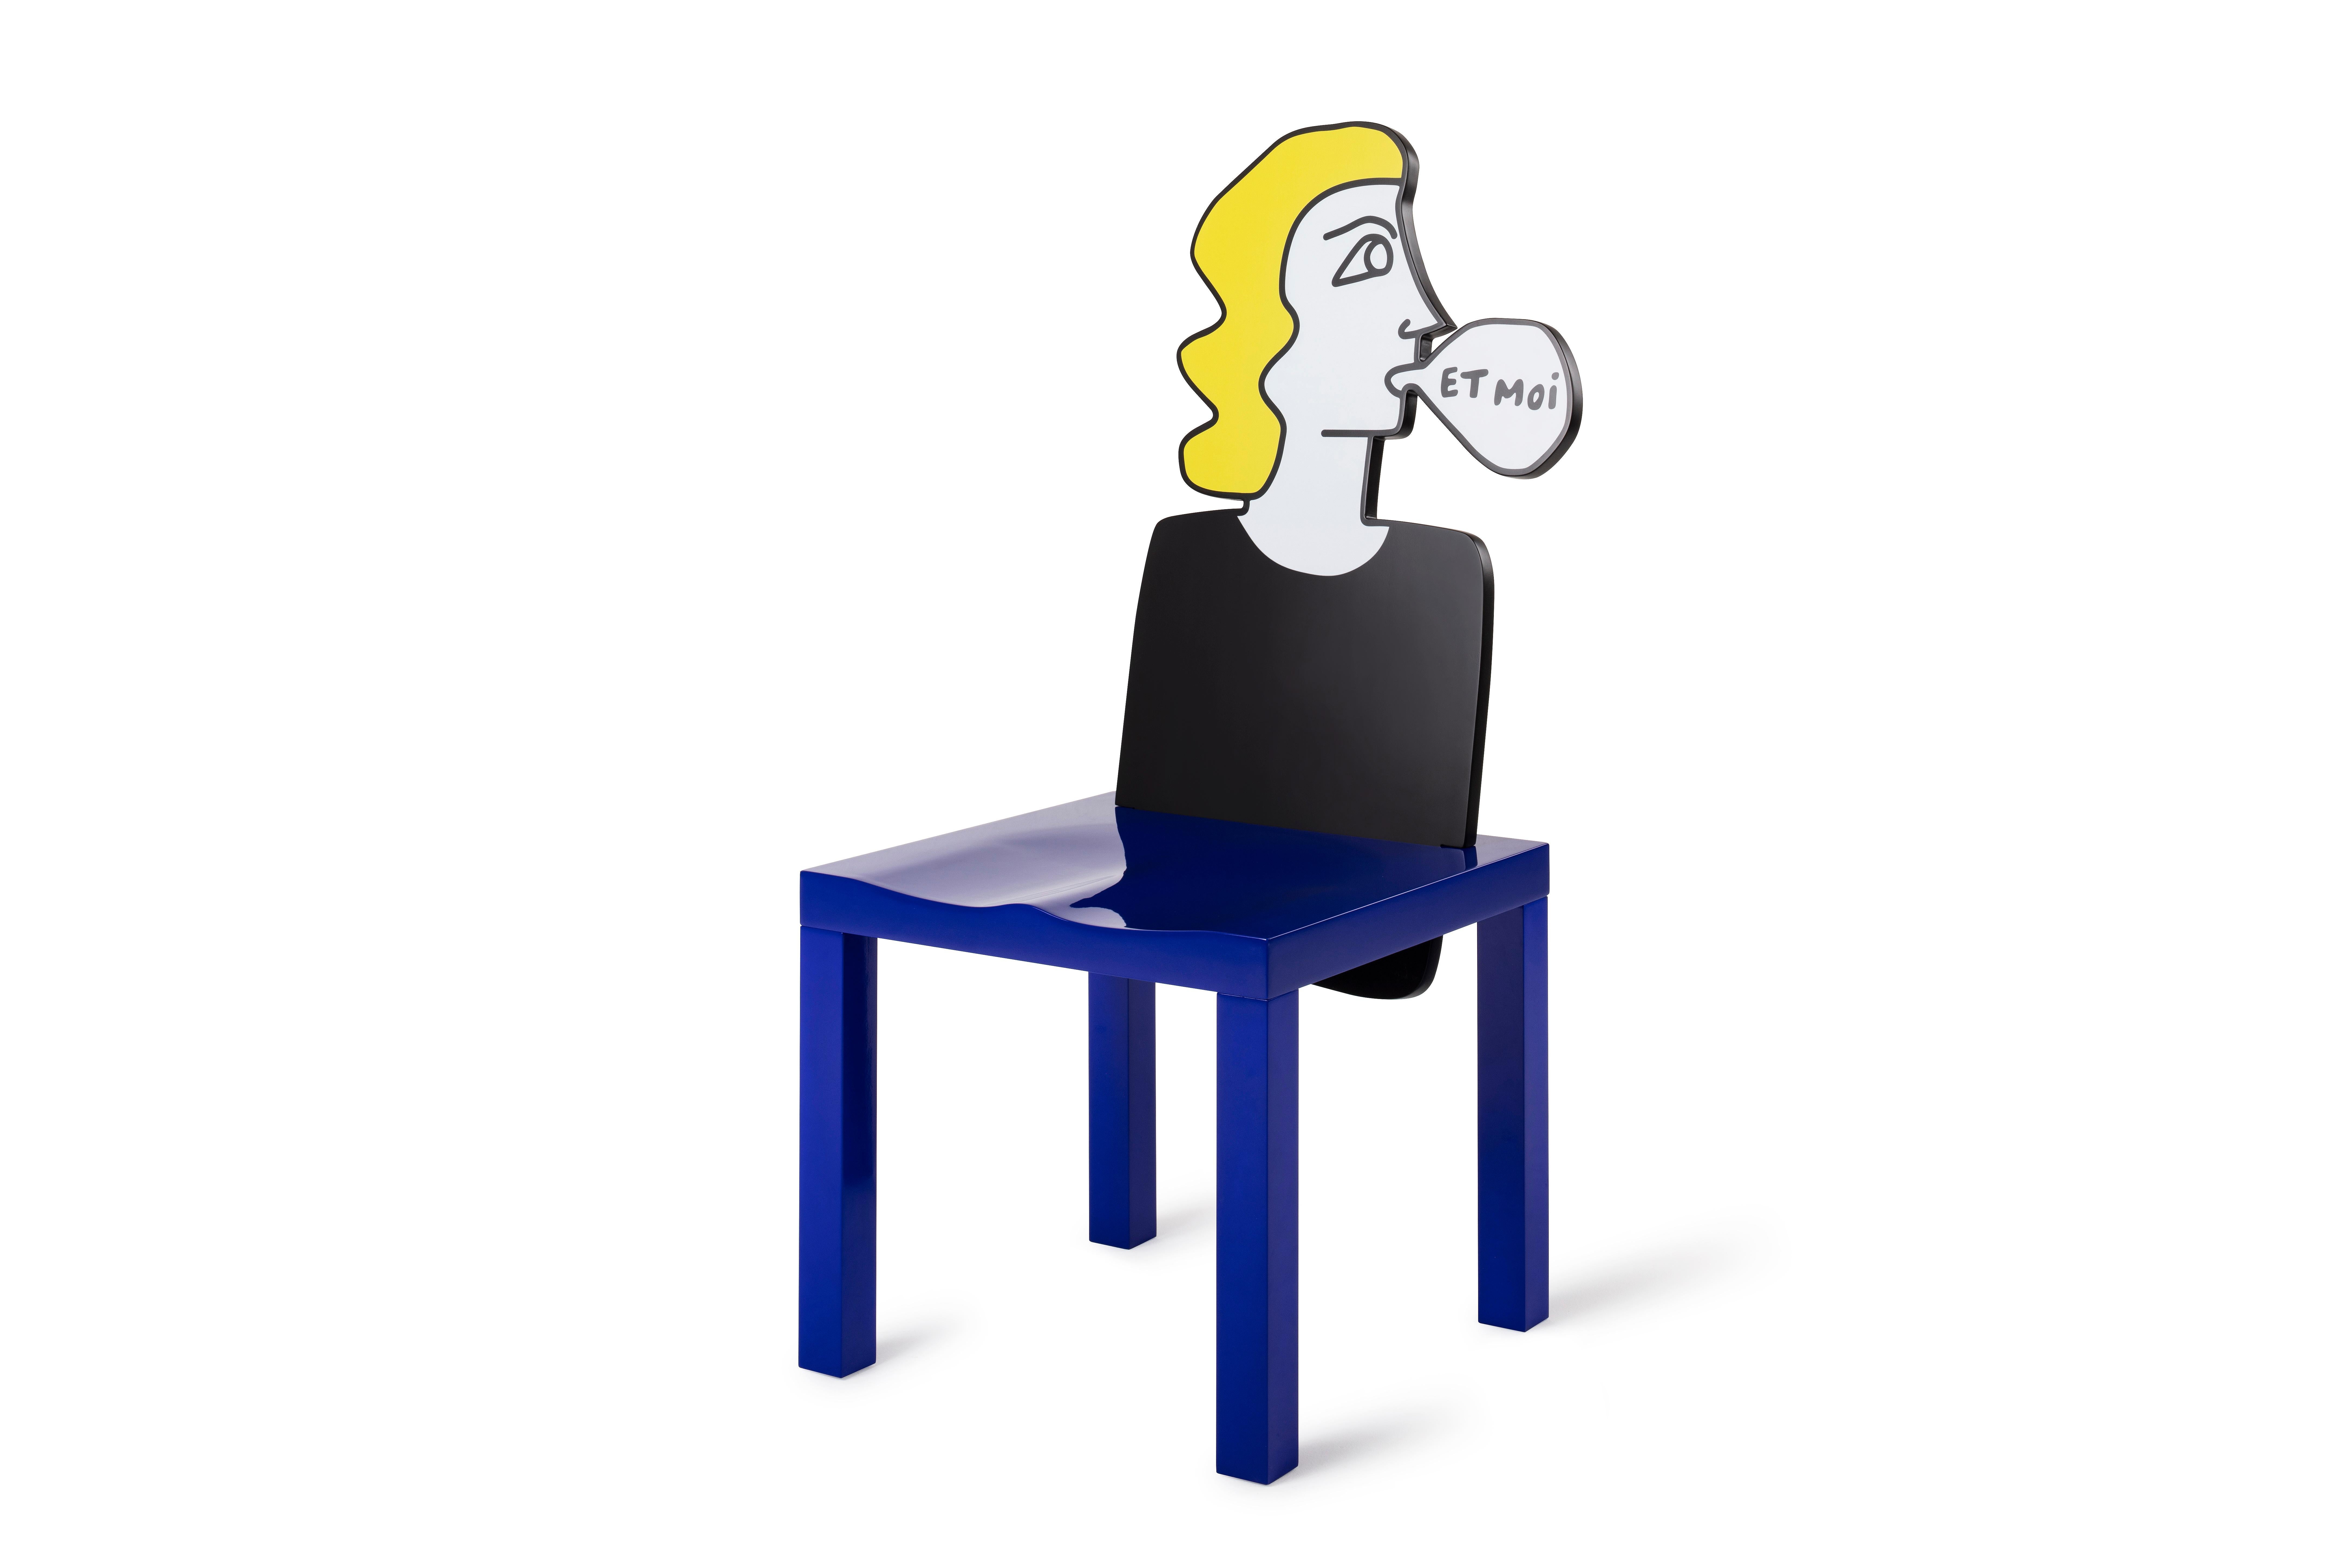 Other Human Chair N1 by Jean-Charles de Castelbajac For Sale